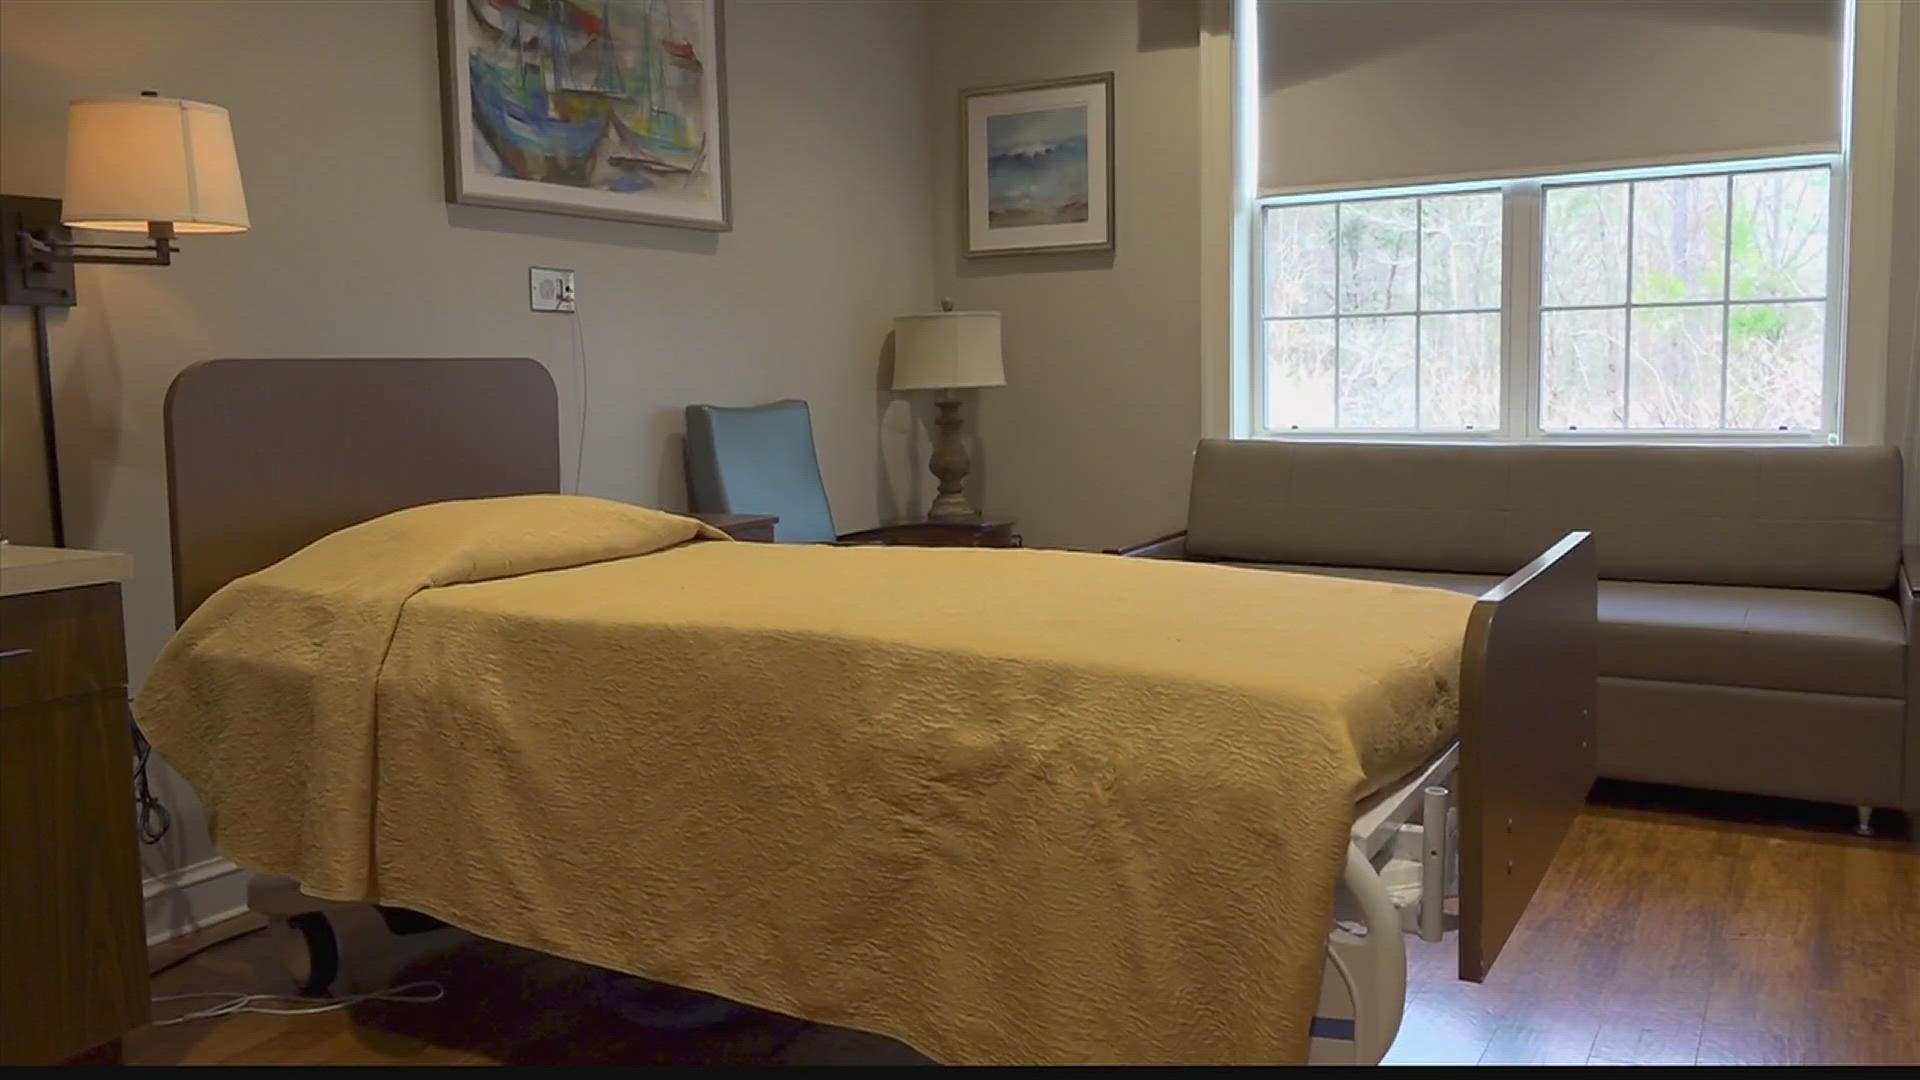 With much talk about hospice due to Jimmy Carter's decision to receive treatment in that manner, we asked local professionals to explain the care provided.